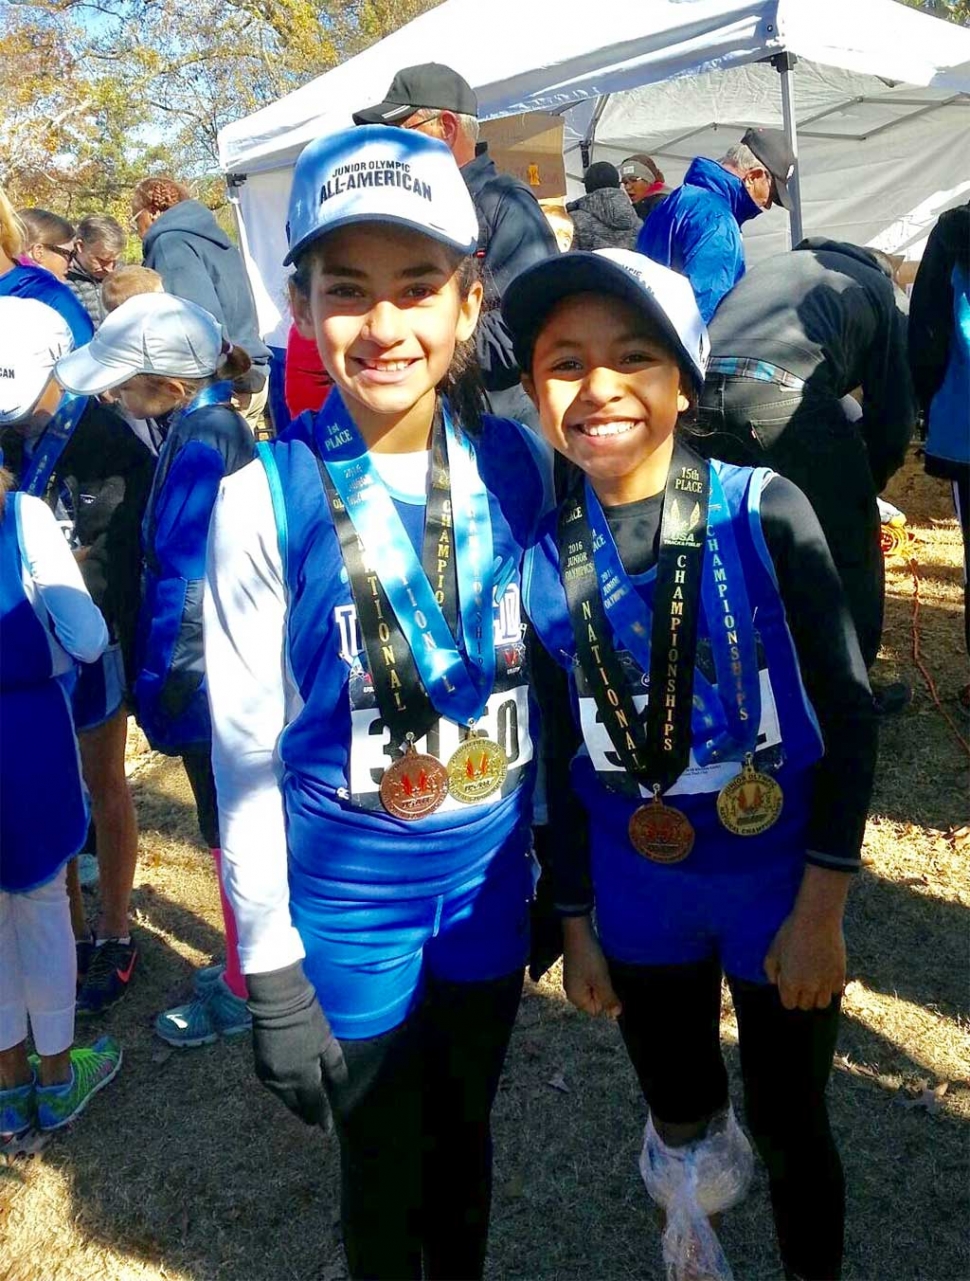 Lindsey Ramirez placed 14th and teammate Niza Laureano placed 15th out of 341 runners in the 9 & 10 year old division